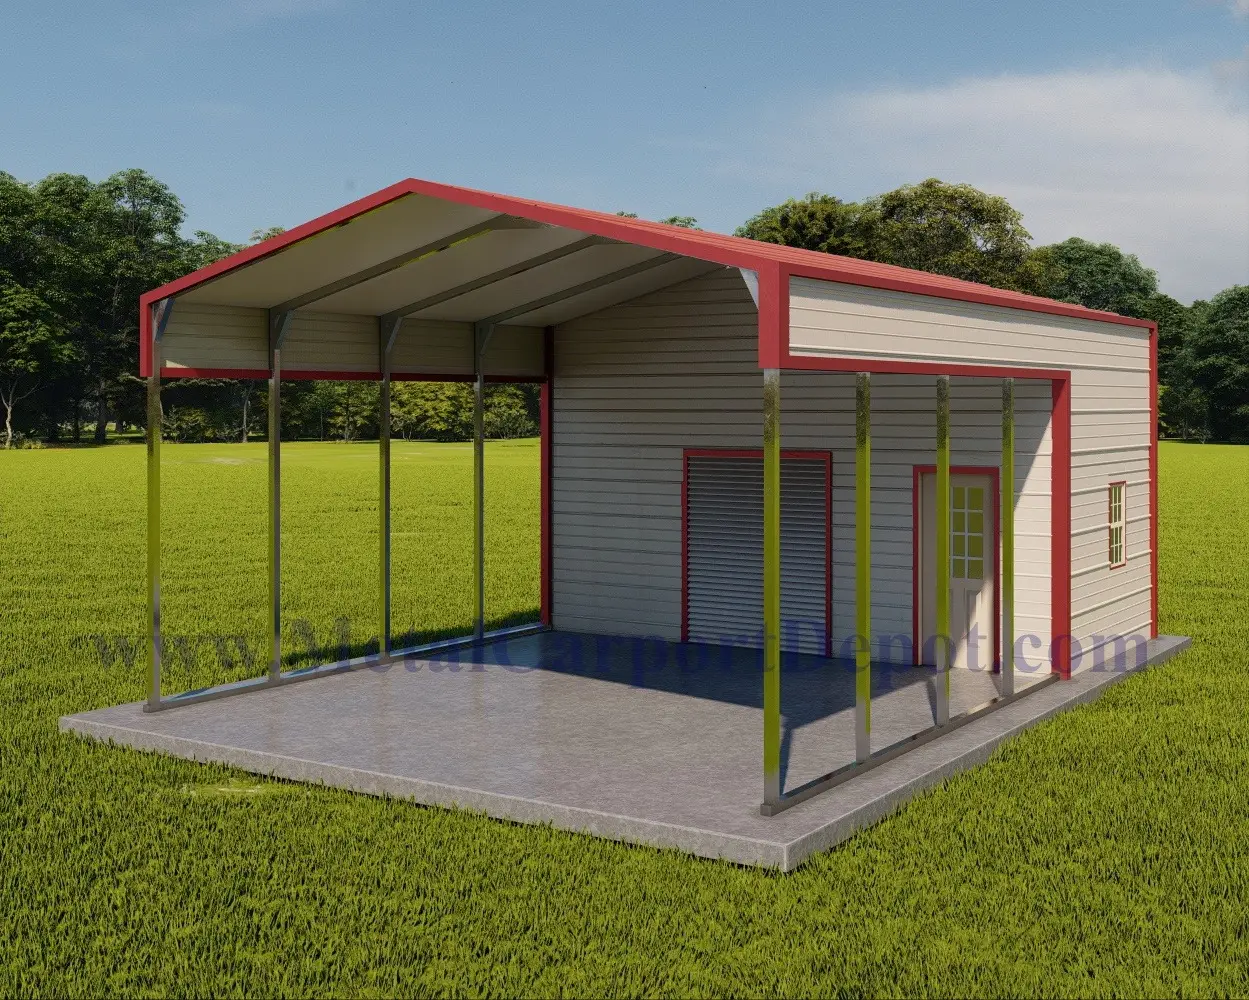 Metal Carport/Storage Combo Unit Image With Red Roof, Red Trim, and Pebble Beige Walls